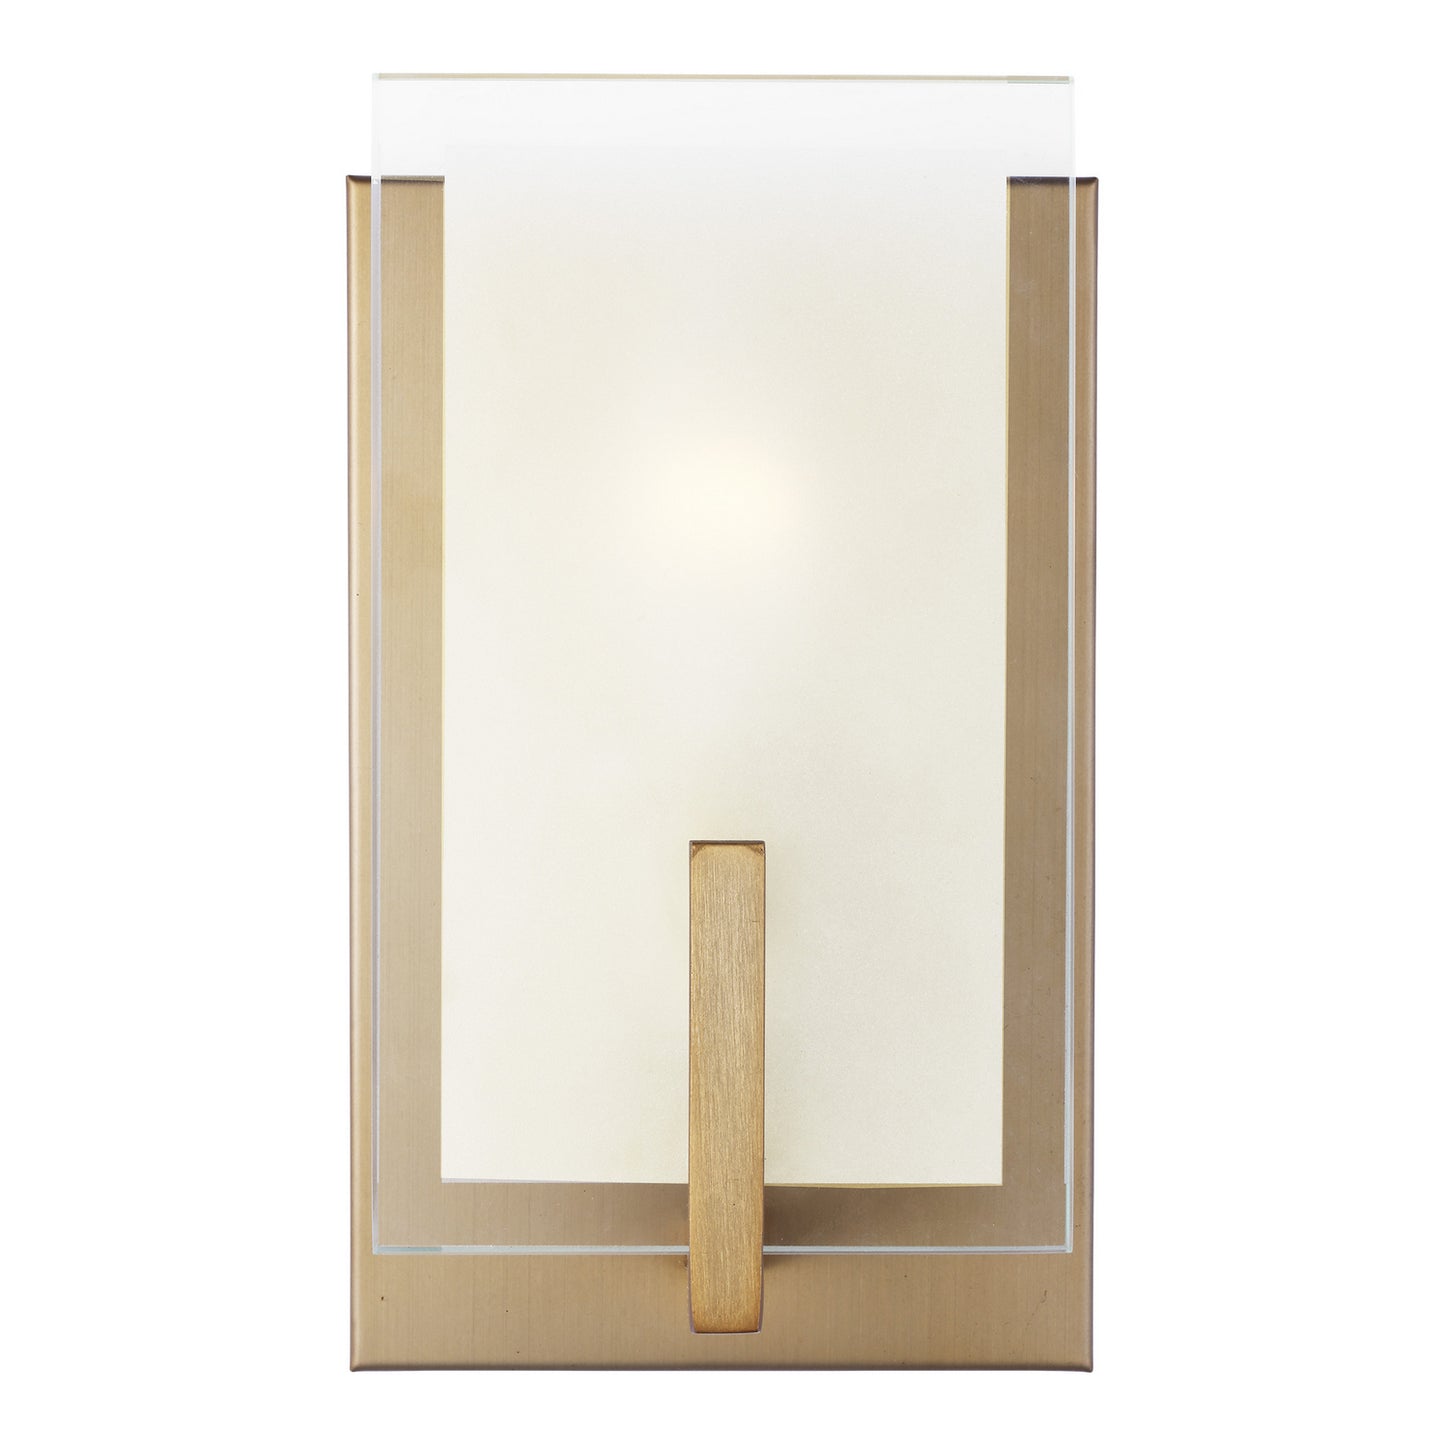 Load image into Gallery viewer, Visual Comfort Studio - 4130801-848 - One Light Wall / Bath Sconce - Syll - Satin Brass
